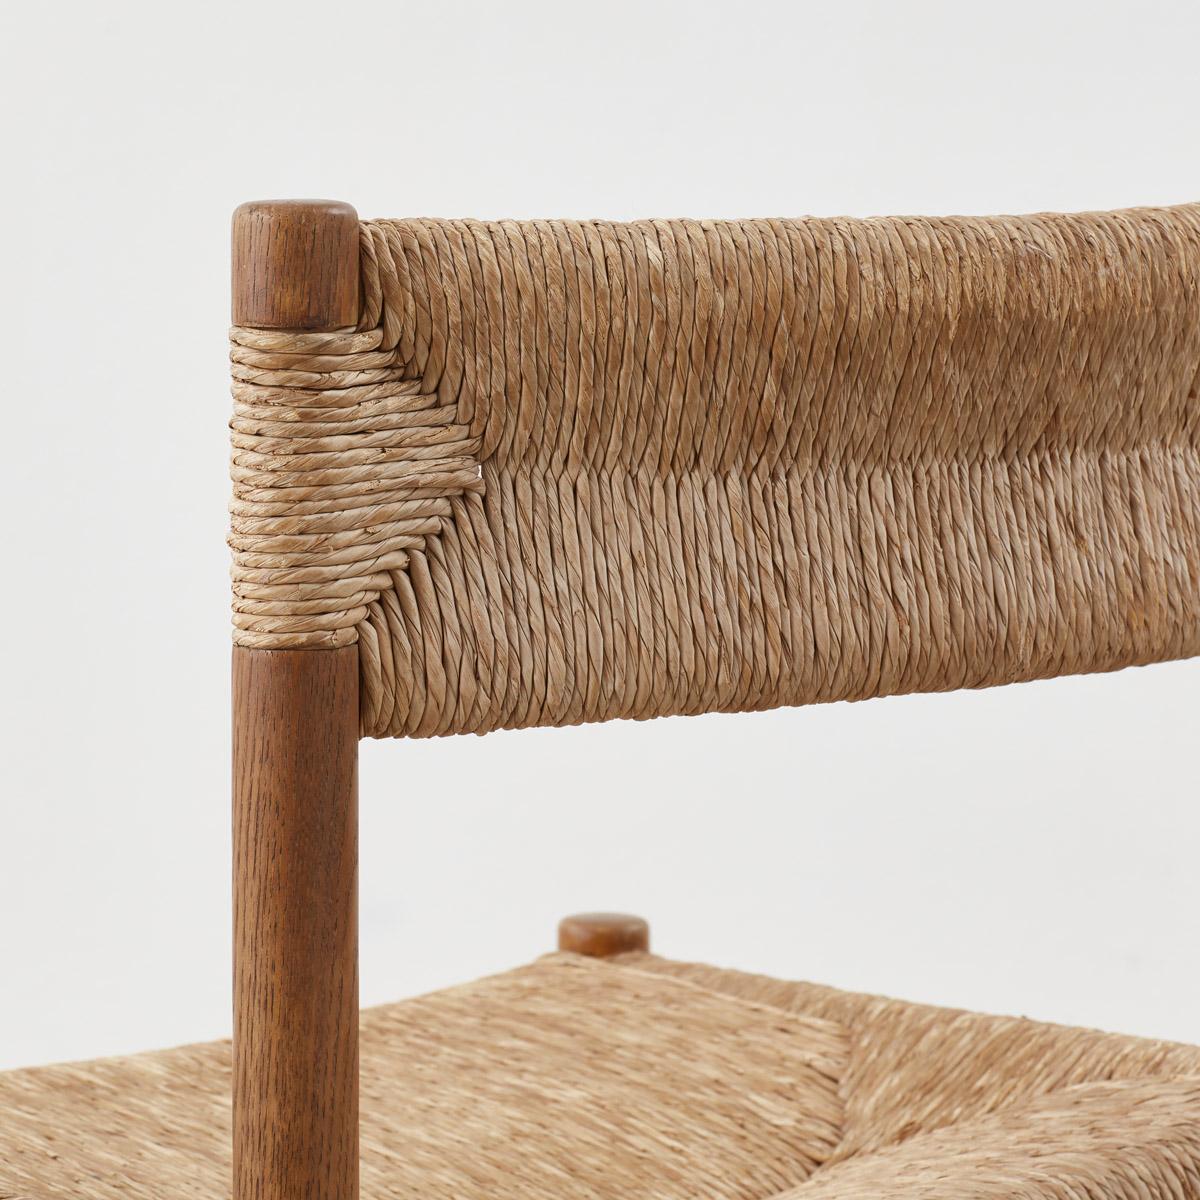 Straw Pair of Charlotte Perriand Dordogne Chairs for Robert Sentou, France c1950